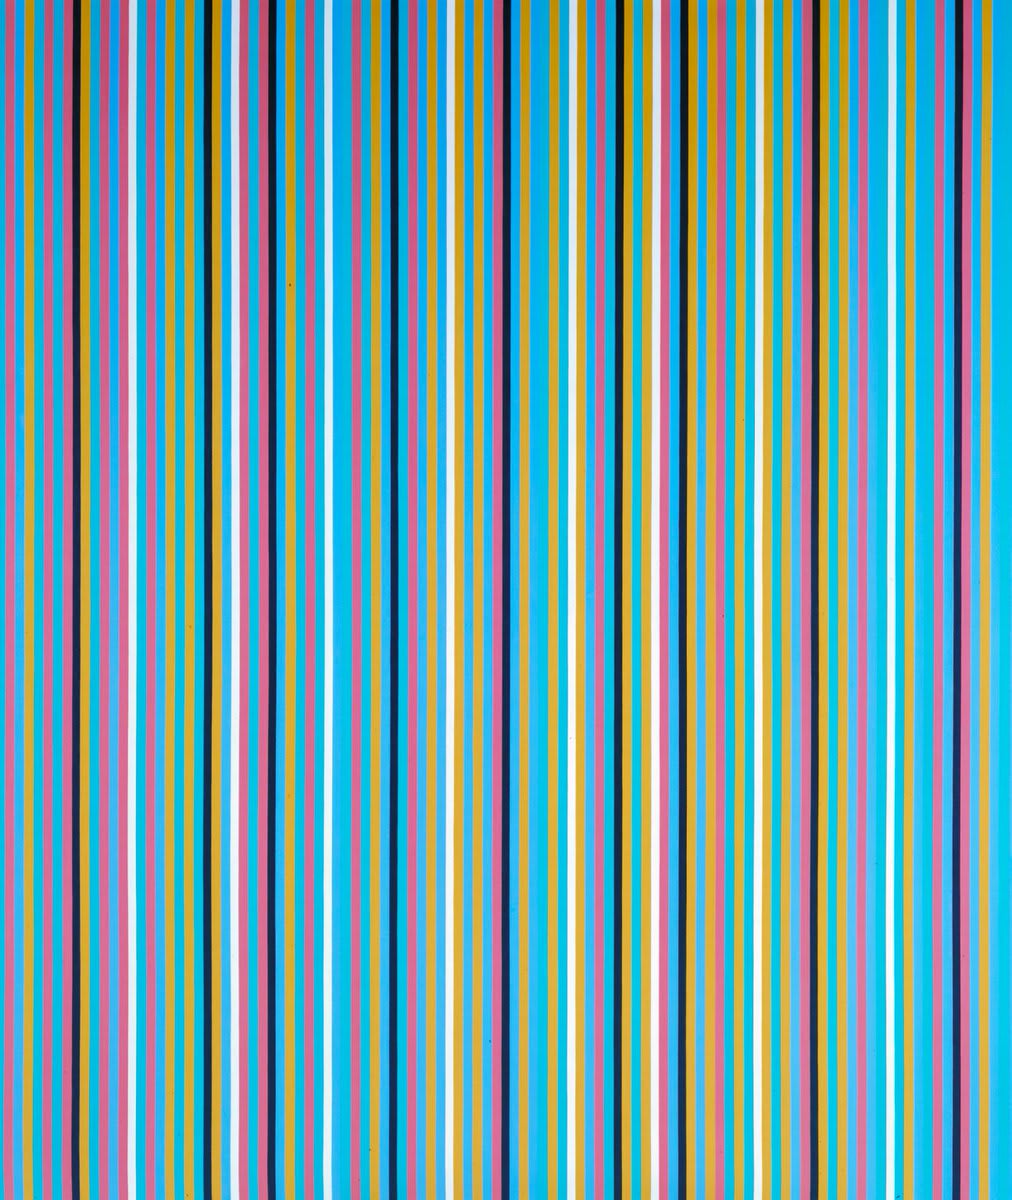 WorkoftheWeek is this piece of optical art, which uses popping colour & geometric shapes to explore the nature of perception. Bridget Riley, Achæan, 1981 © Bridget Riley 2020. All rights reserved. On free display at Tate Britain.